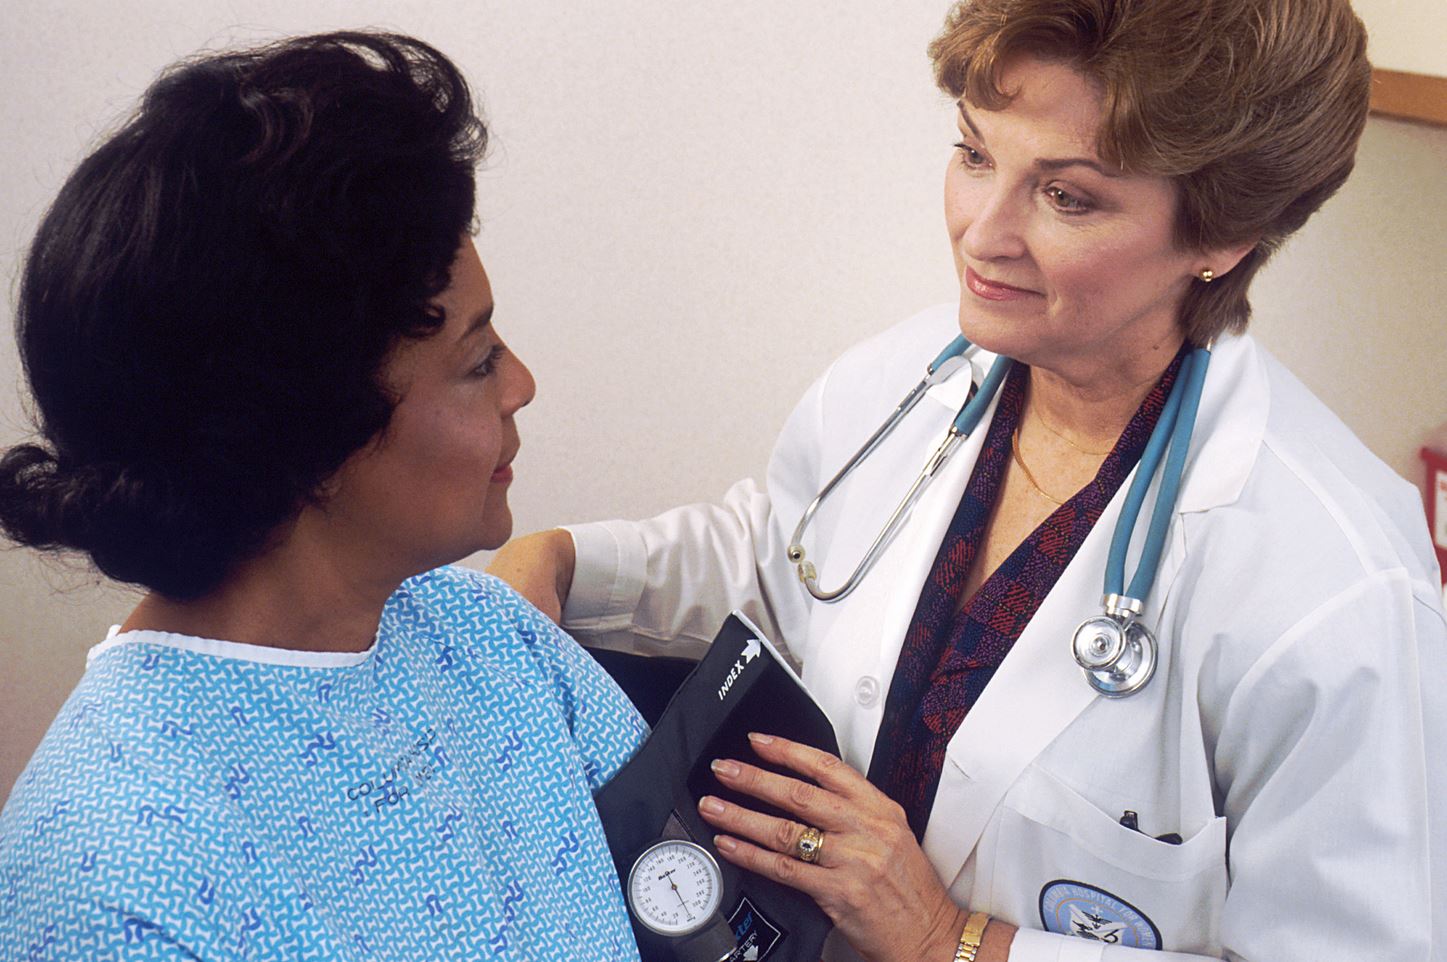 4 Healthcare Careers That Make a Real Impact in Patients' Lives